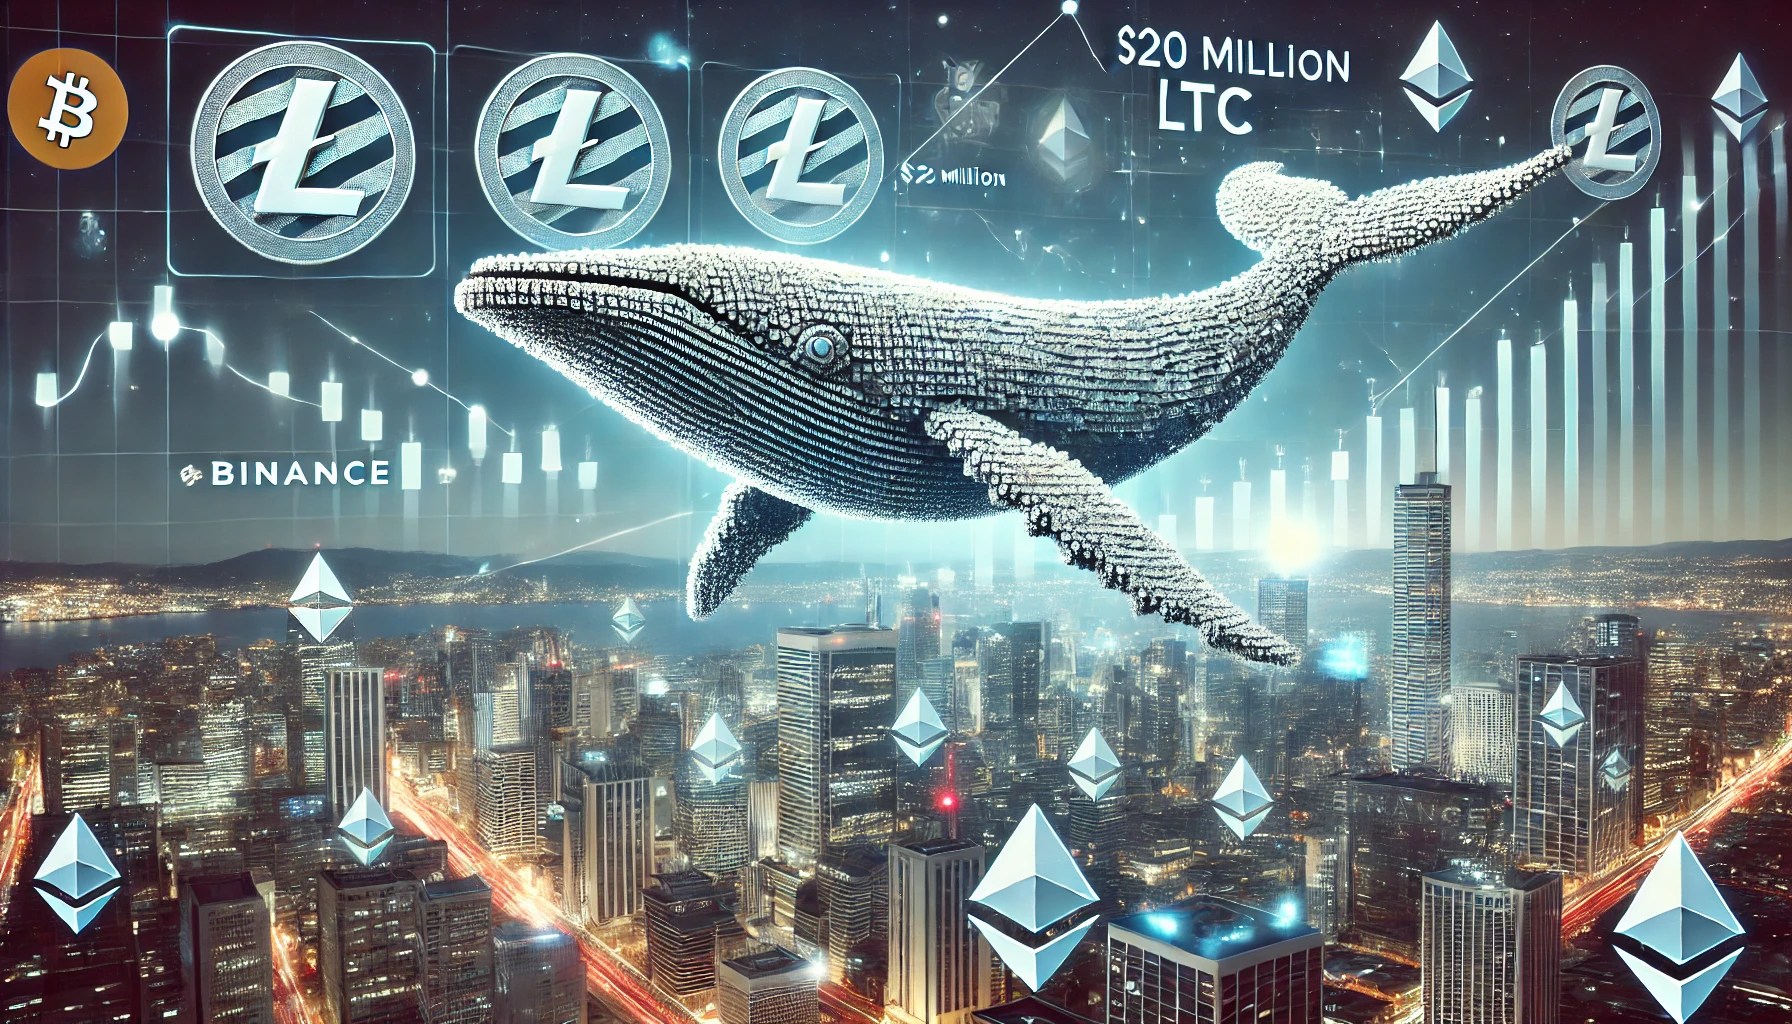 On-chain data shows a Litecoin whale has withdrawn around $20 million in LTC from Binance, which could be bullish for the asset’s price. Litecoin Whale Has Just Made A Large Outflow From Binance According to data from the cryptocurrency transaction tracker service Whale Alert, a massive transfer has been spotted on the Litecoin blockchain during